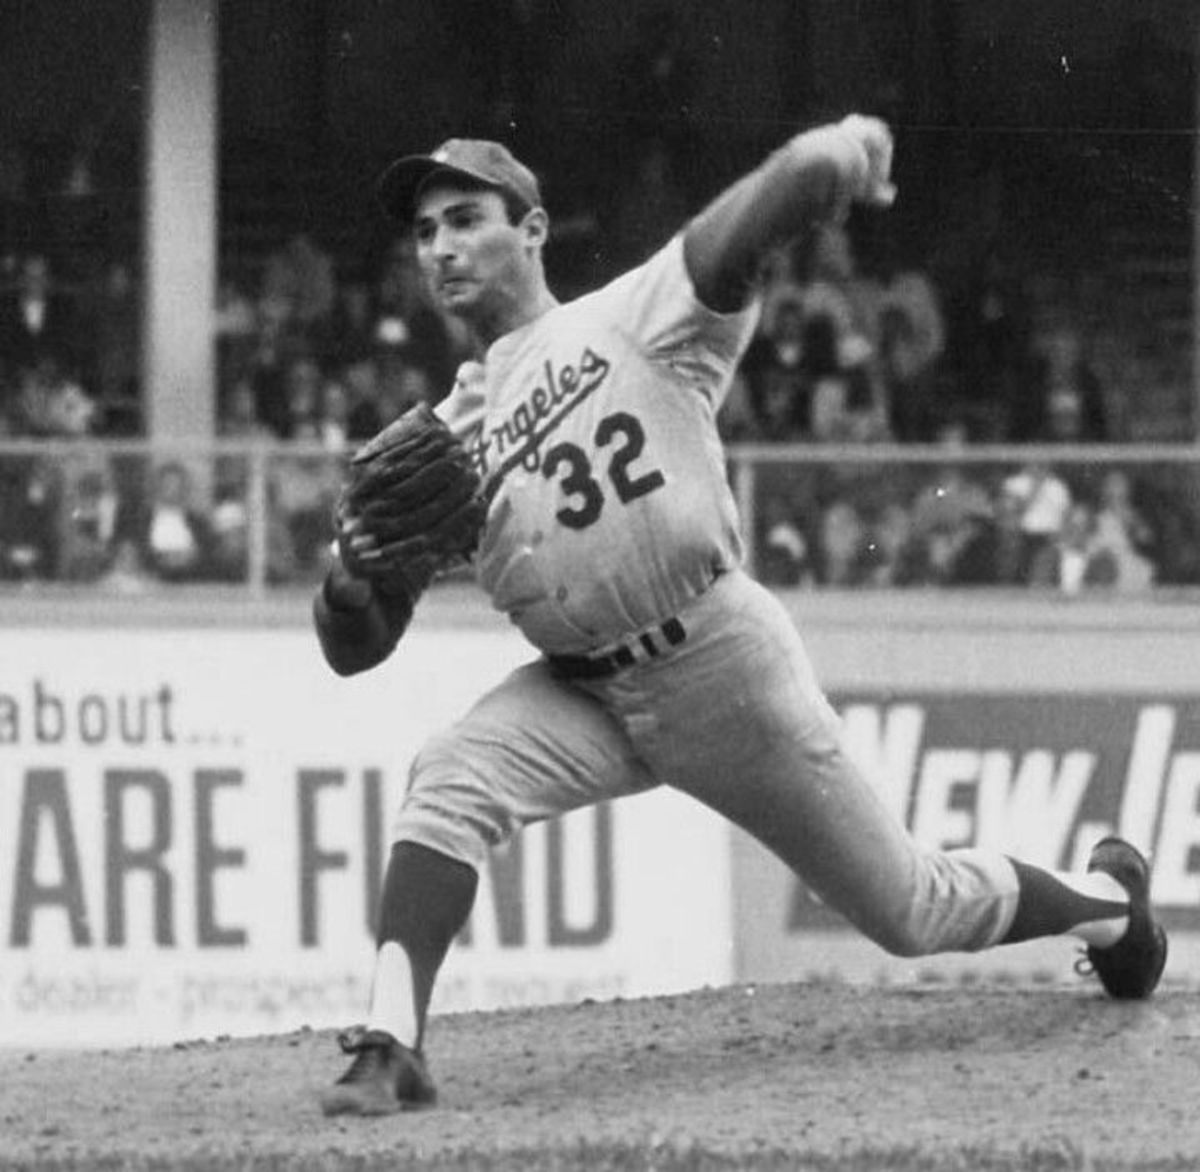 Born in Brooklyn with Pride: Sandy Koufax Hall of Fame Pitcher